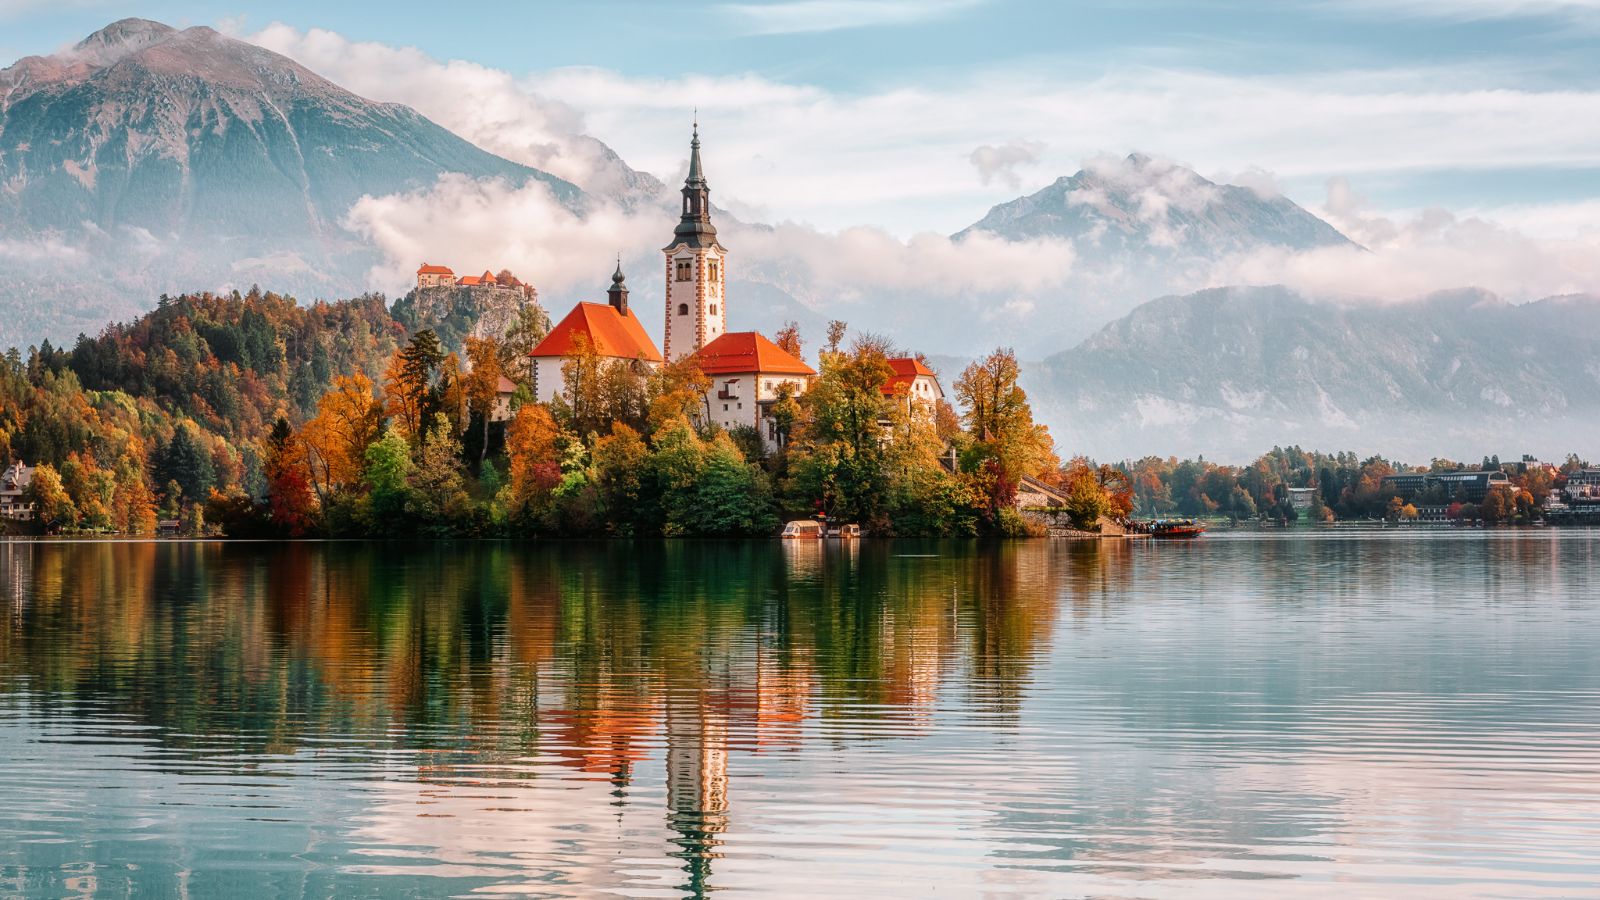 <p>If you want to step straight into the pages of a children’s storybook, there’s no continent better than Europe. From France and Germany to Italy and Greece, we guarantee the following charming, character-packed towns seem almost too good to be true.</p>